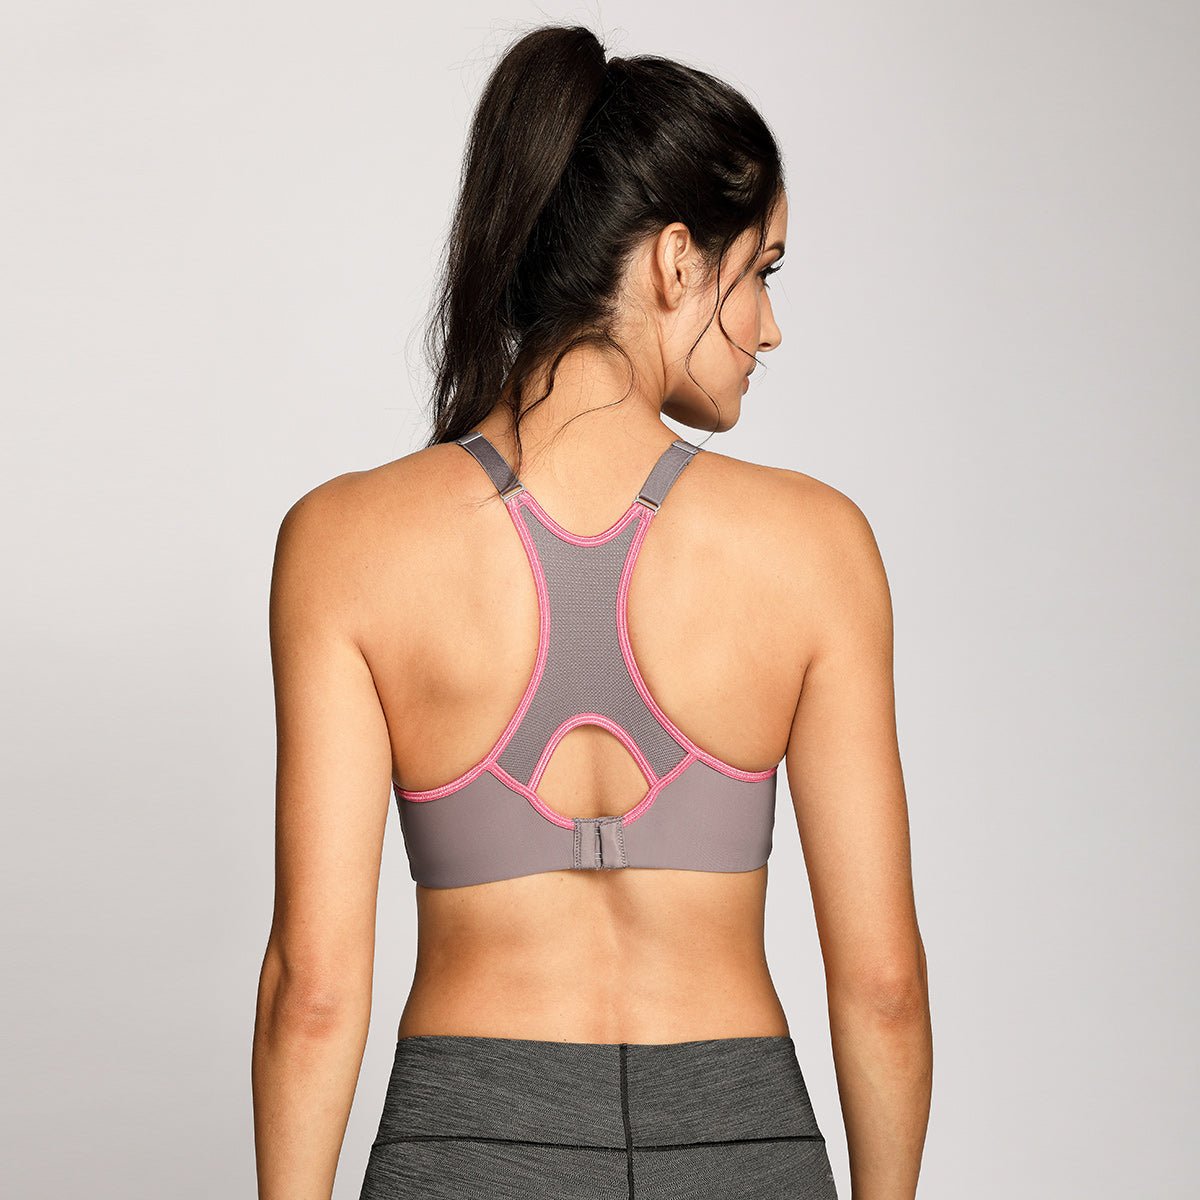 Full Support High Impact Racerback Lightly Lined Underwire Grey Sports Bra - 0cm